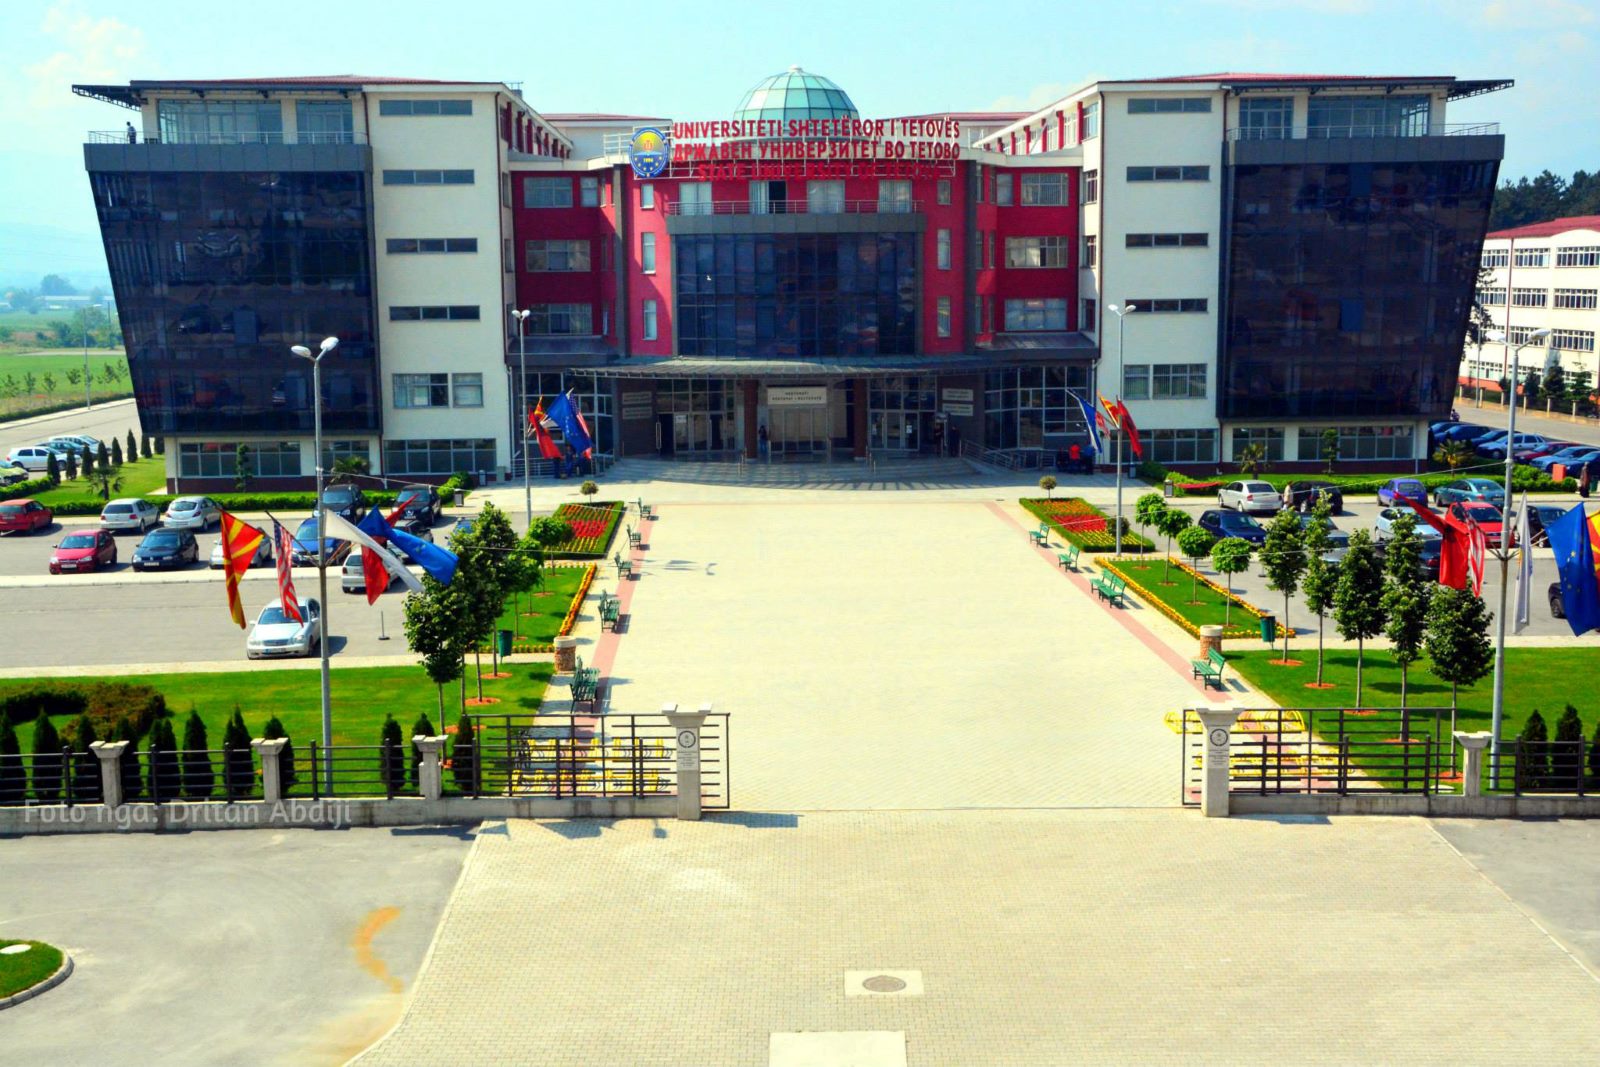 8 Intriguing Facts About University Of Tetovo - Facts.net